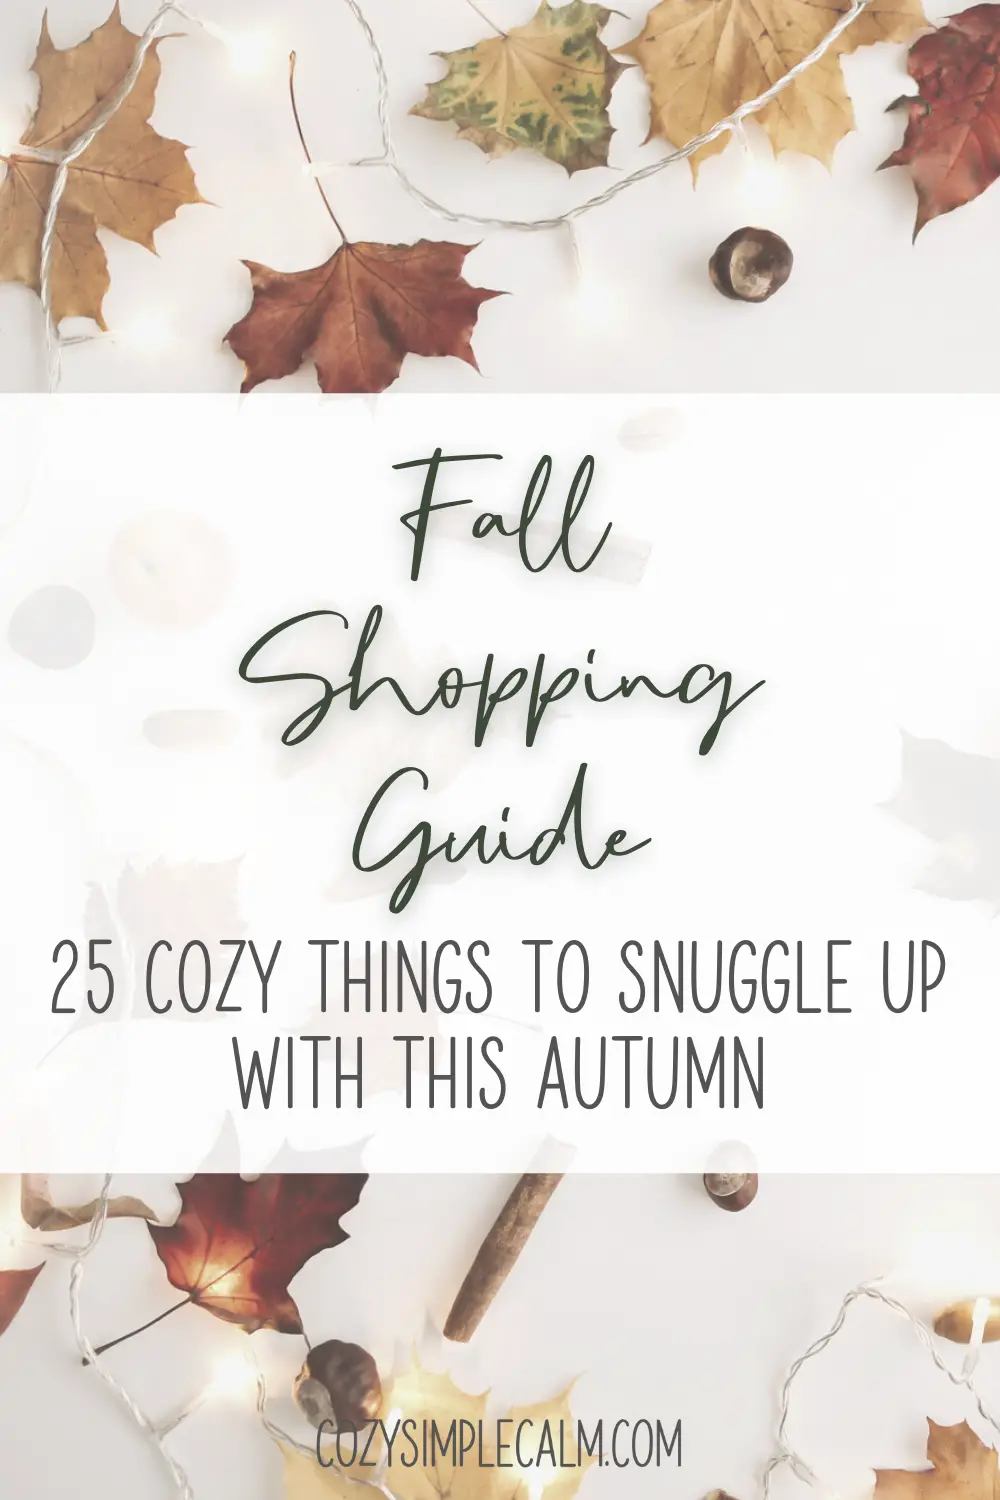 Image of fall leaves and fairy lights - Text overlay: Fall Shopping Guide. 25 cozy things to snuggle up with this autumn - cozysimplecalm.com